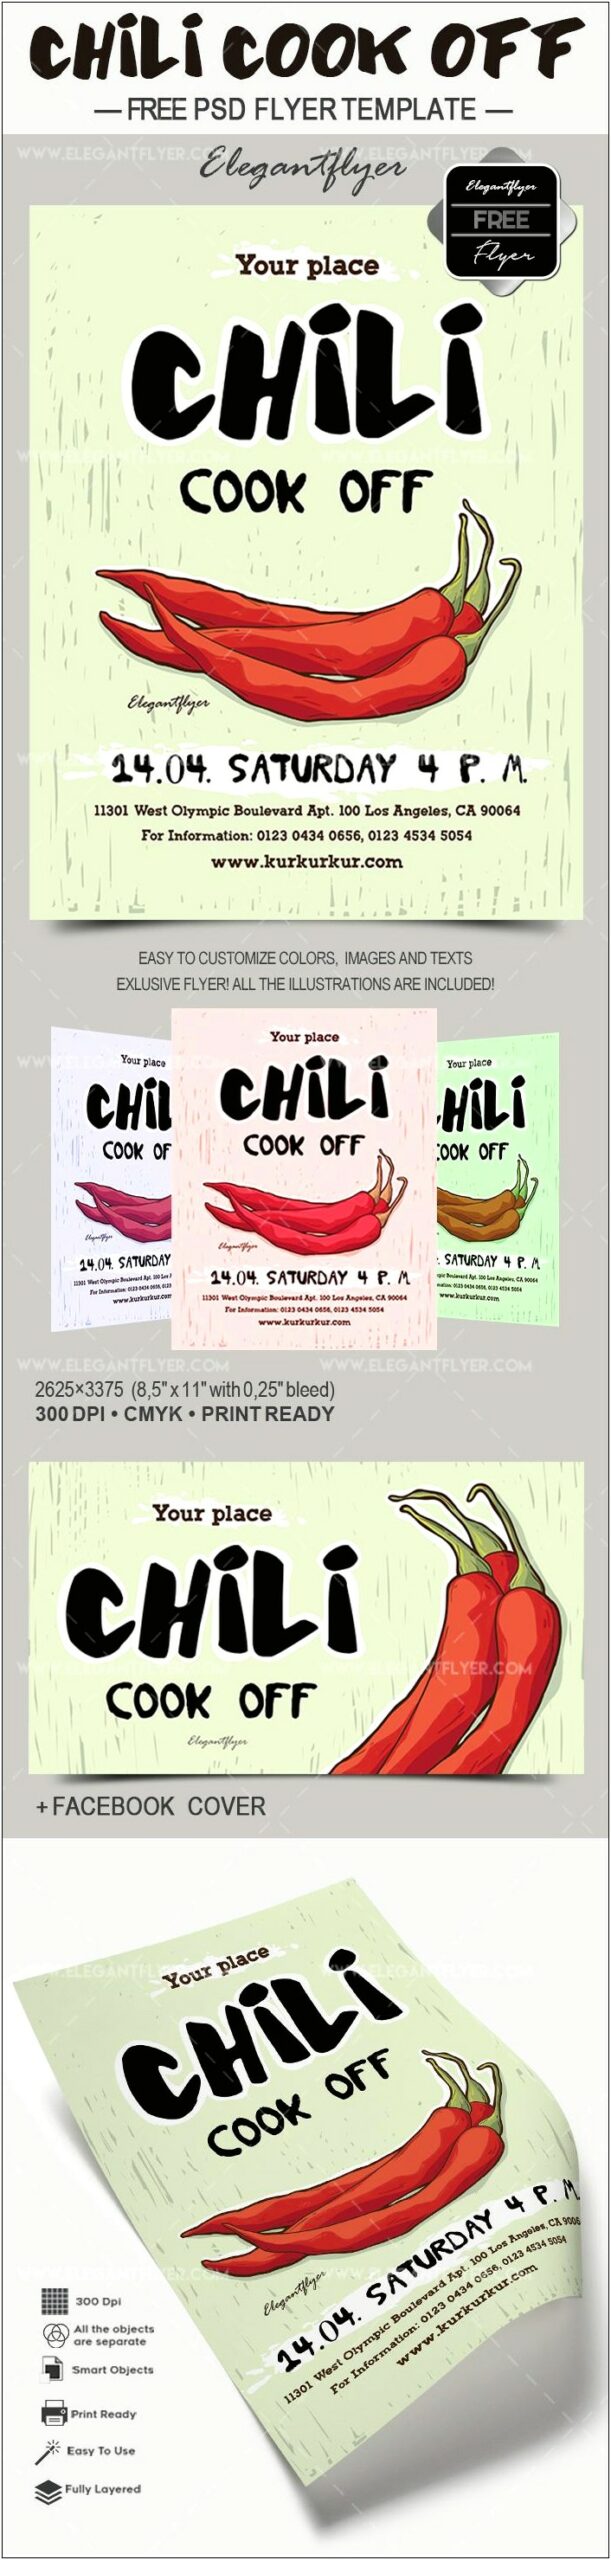 Free Photoshop Chili Cook Off Template